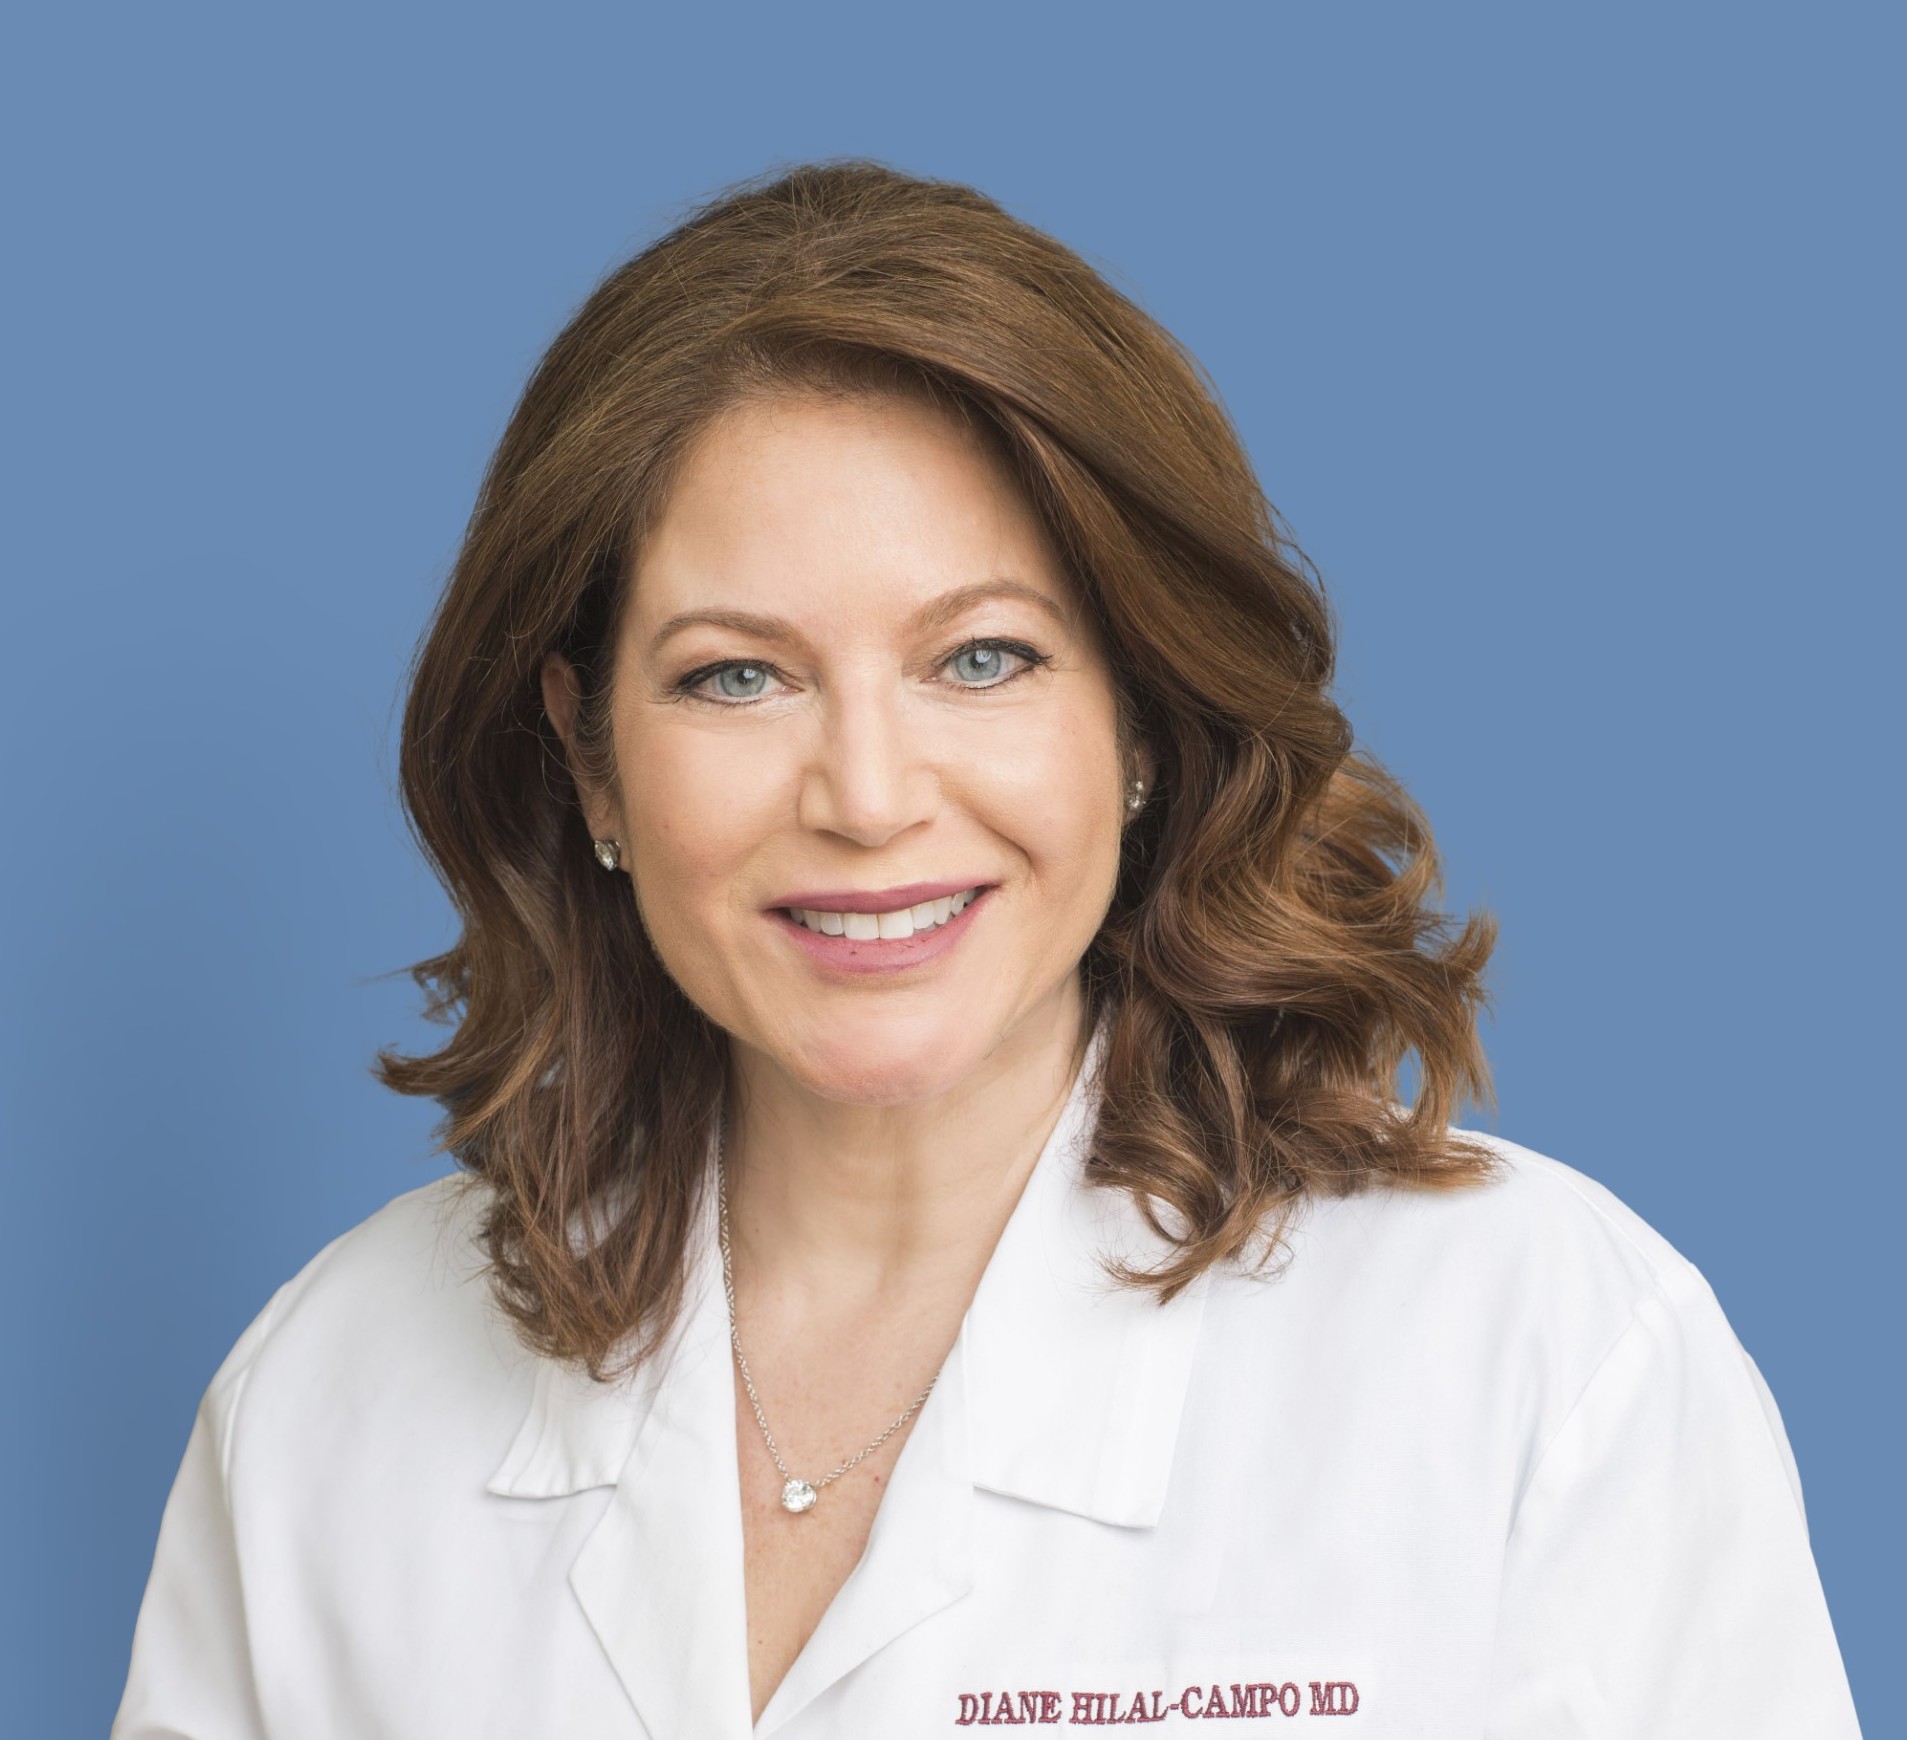 Diane Hilal-Campo, MD